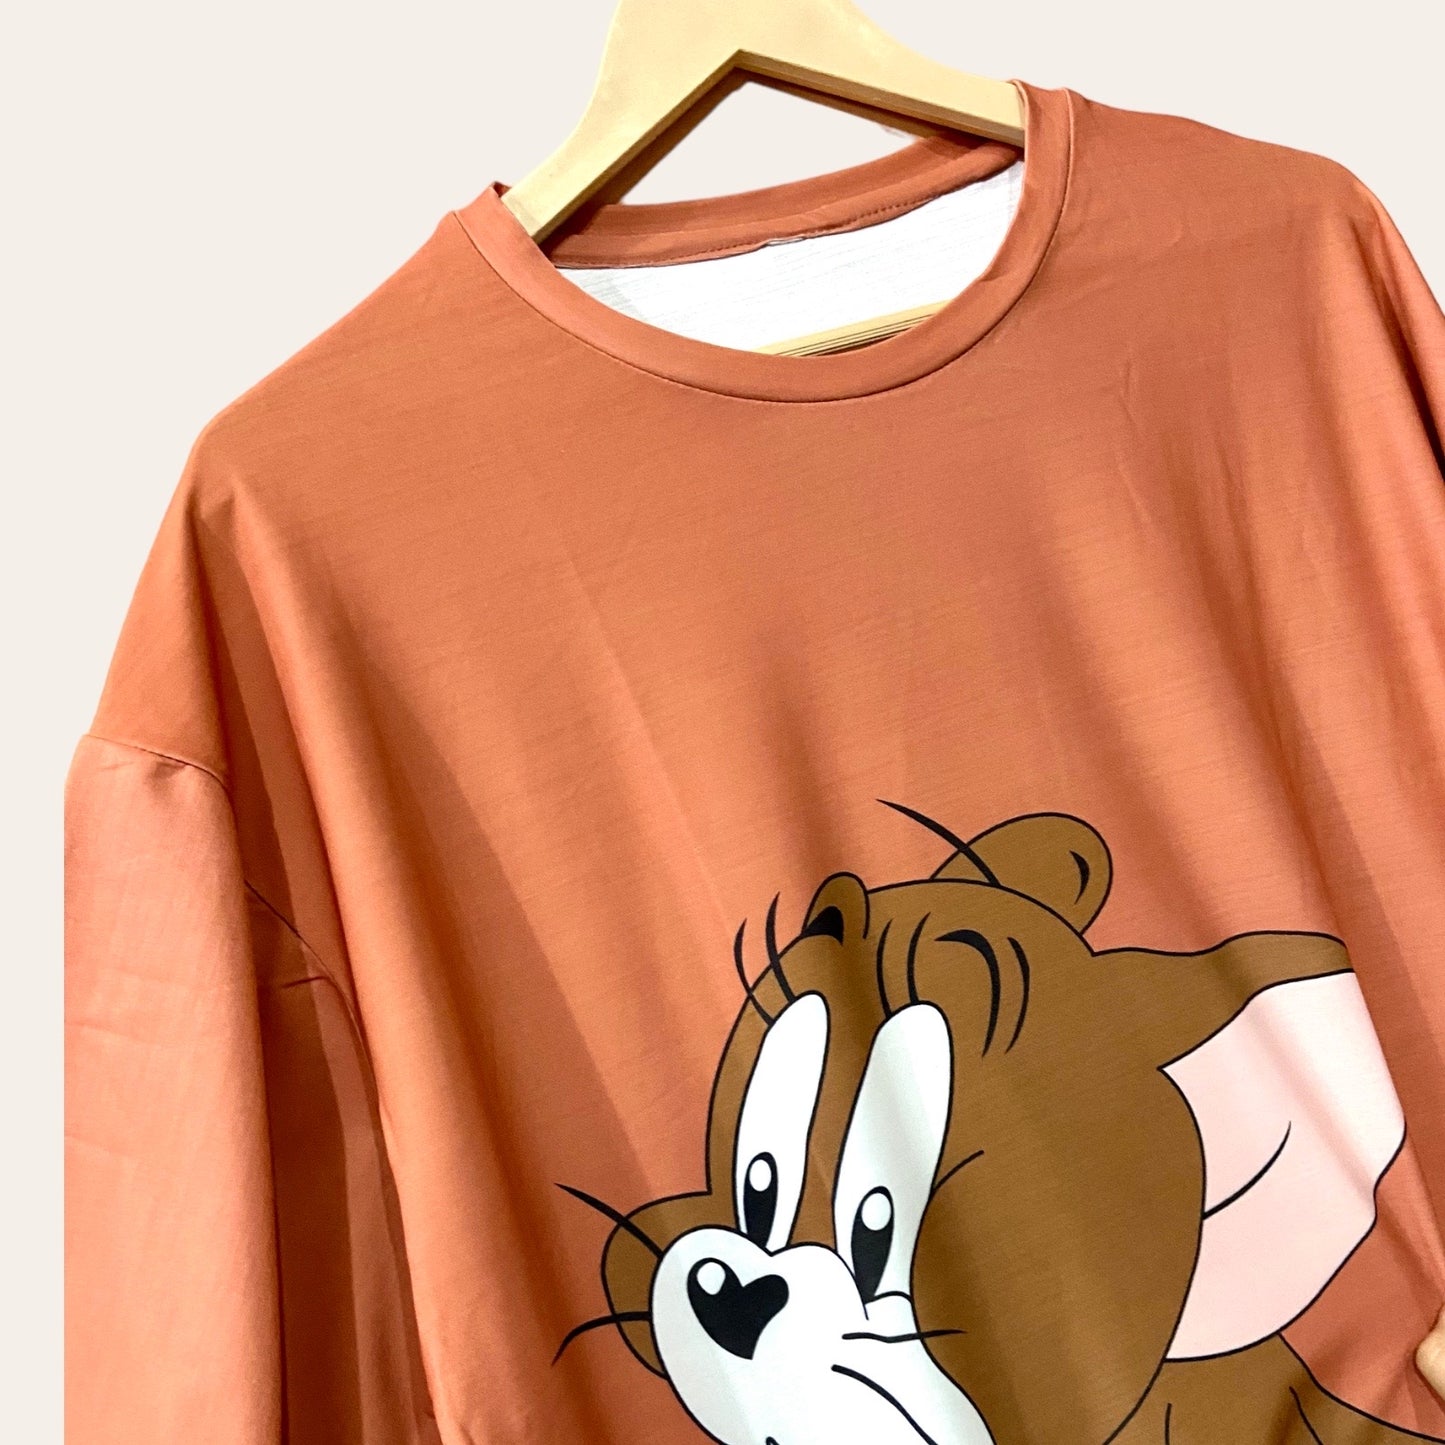 ‘Tom and jerry’ oversized tee